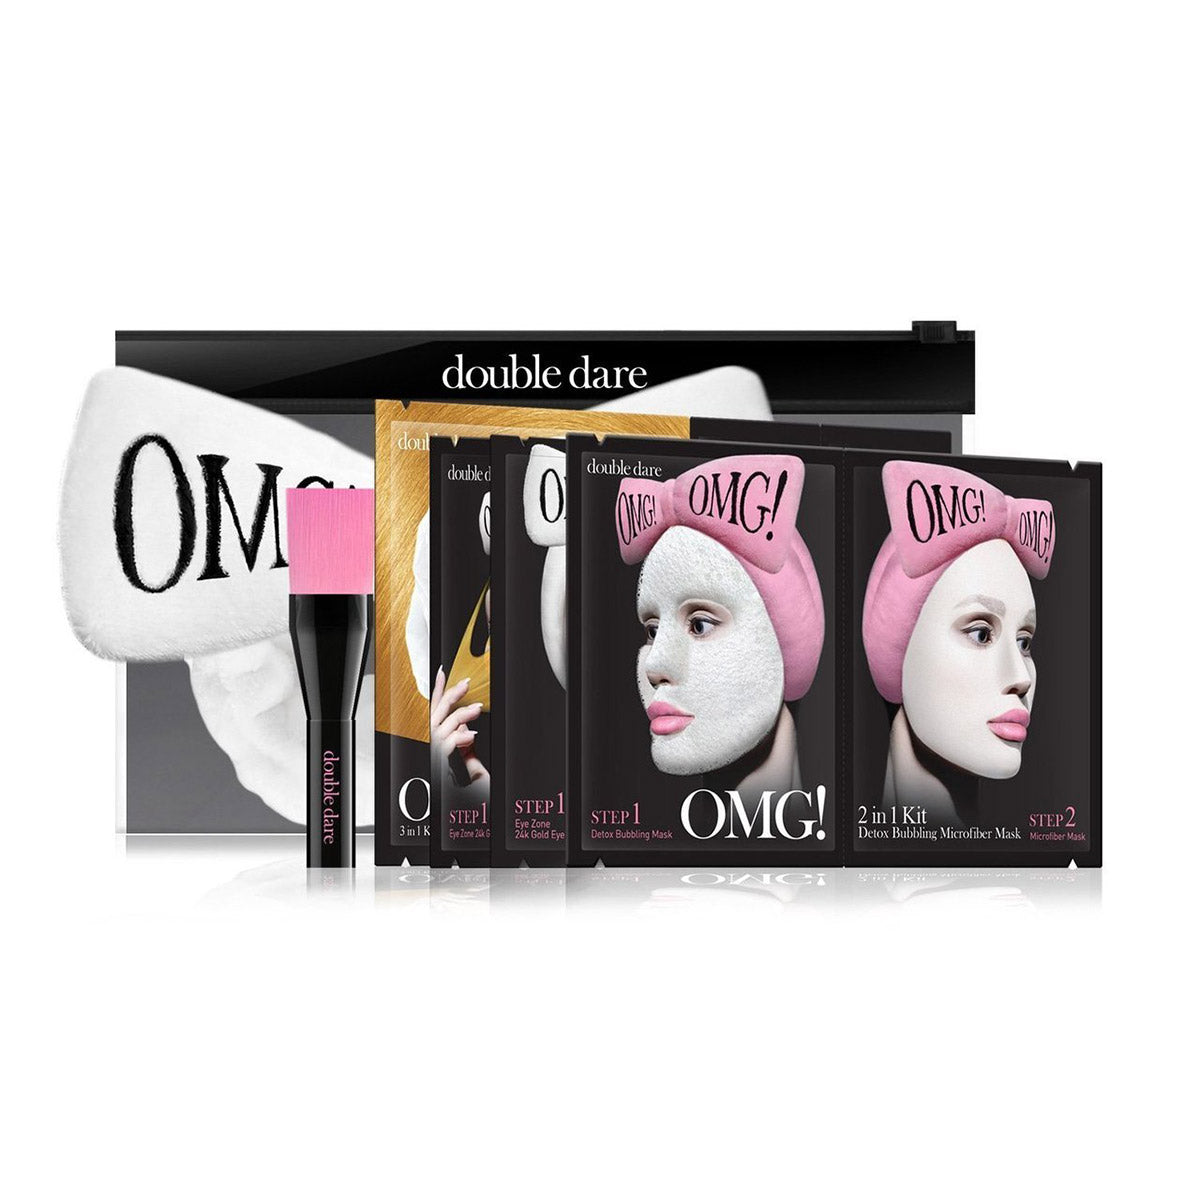 OMG! Premium Package White(4masks with White Hair Band)